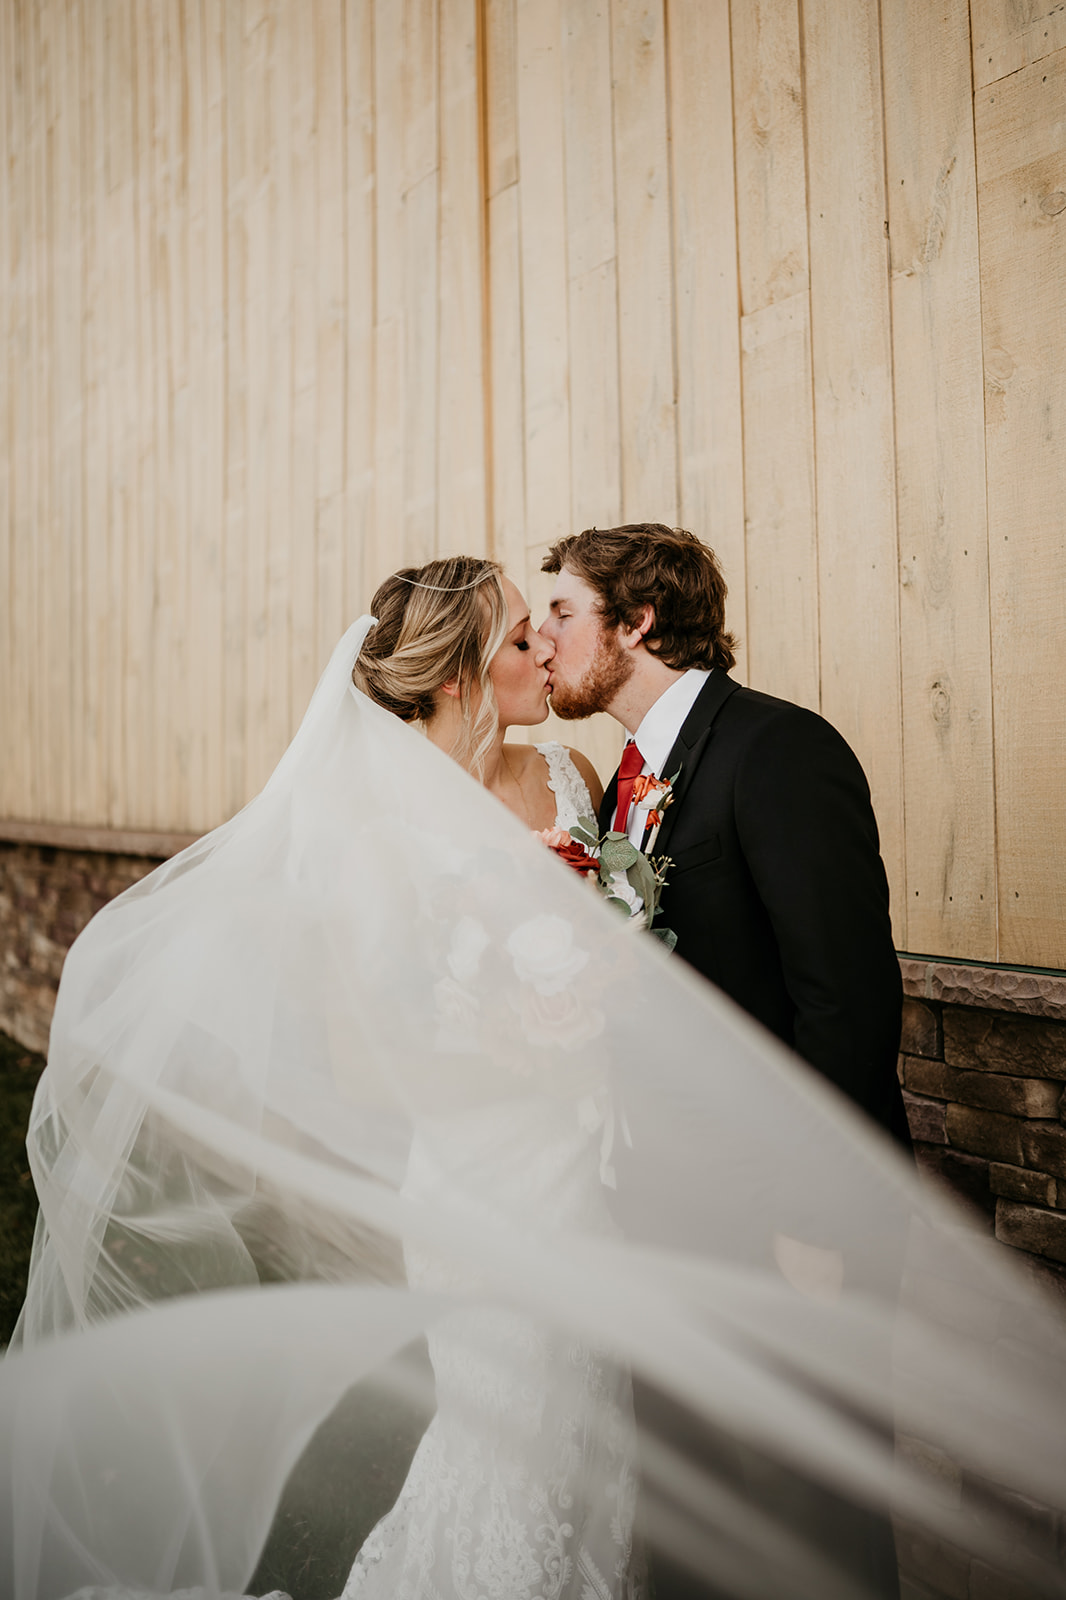 A wedding couple who married in Bancroft, MI at a rustic wedding barn.